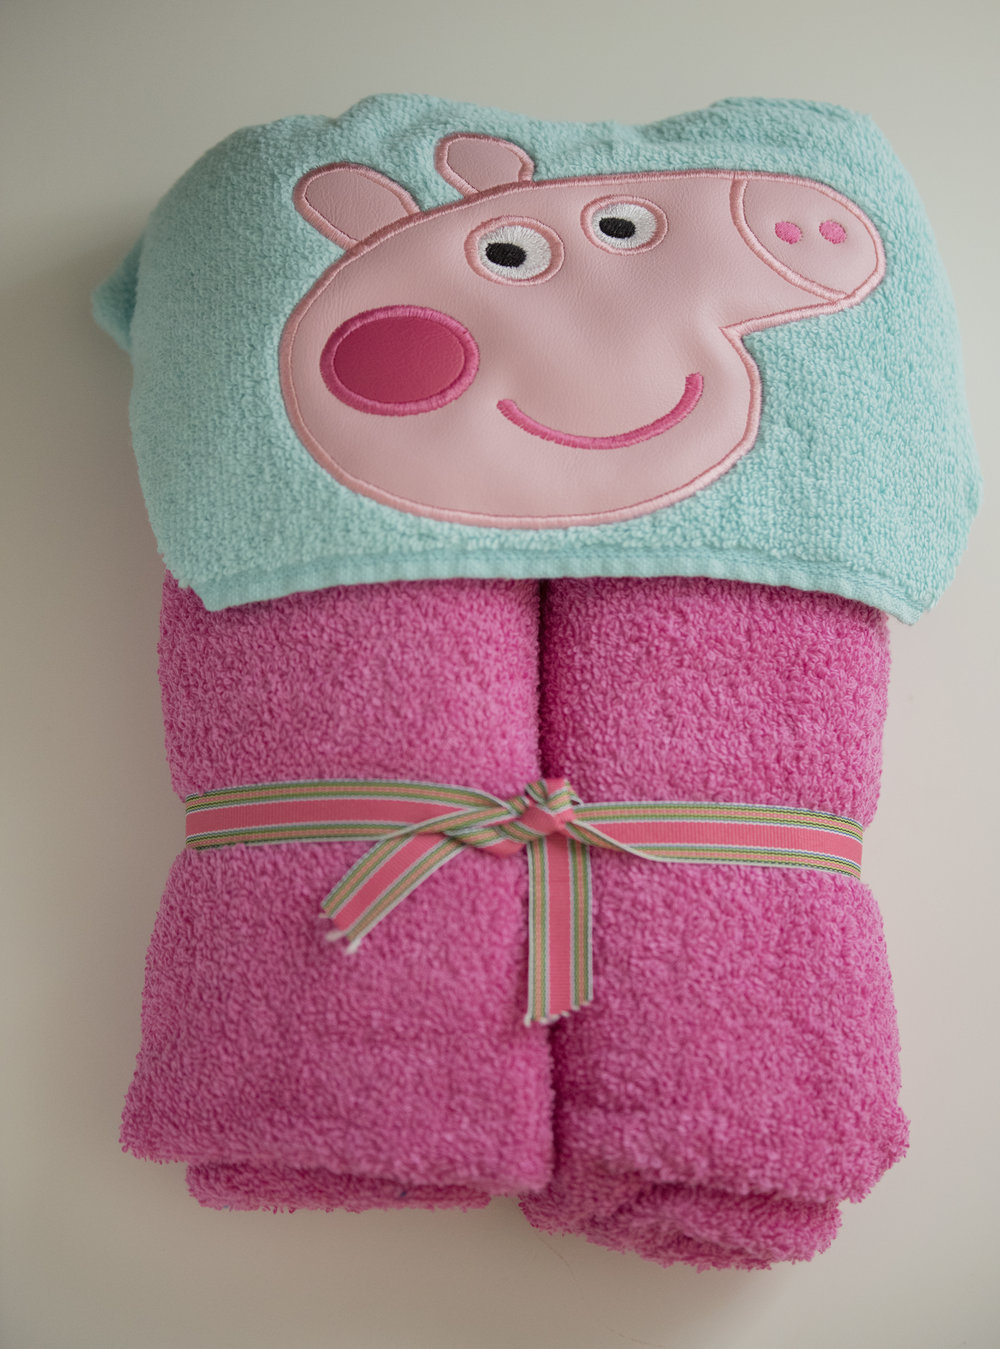  How cute is this hooded towel?! 